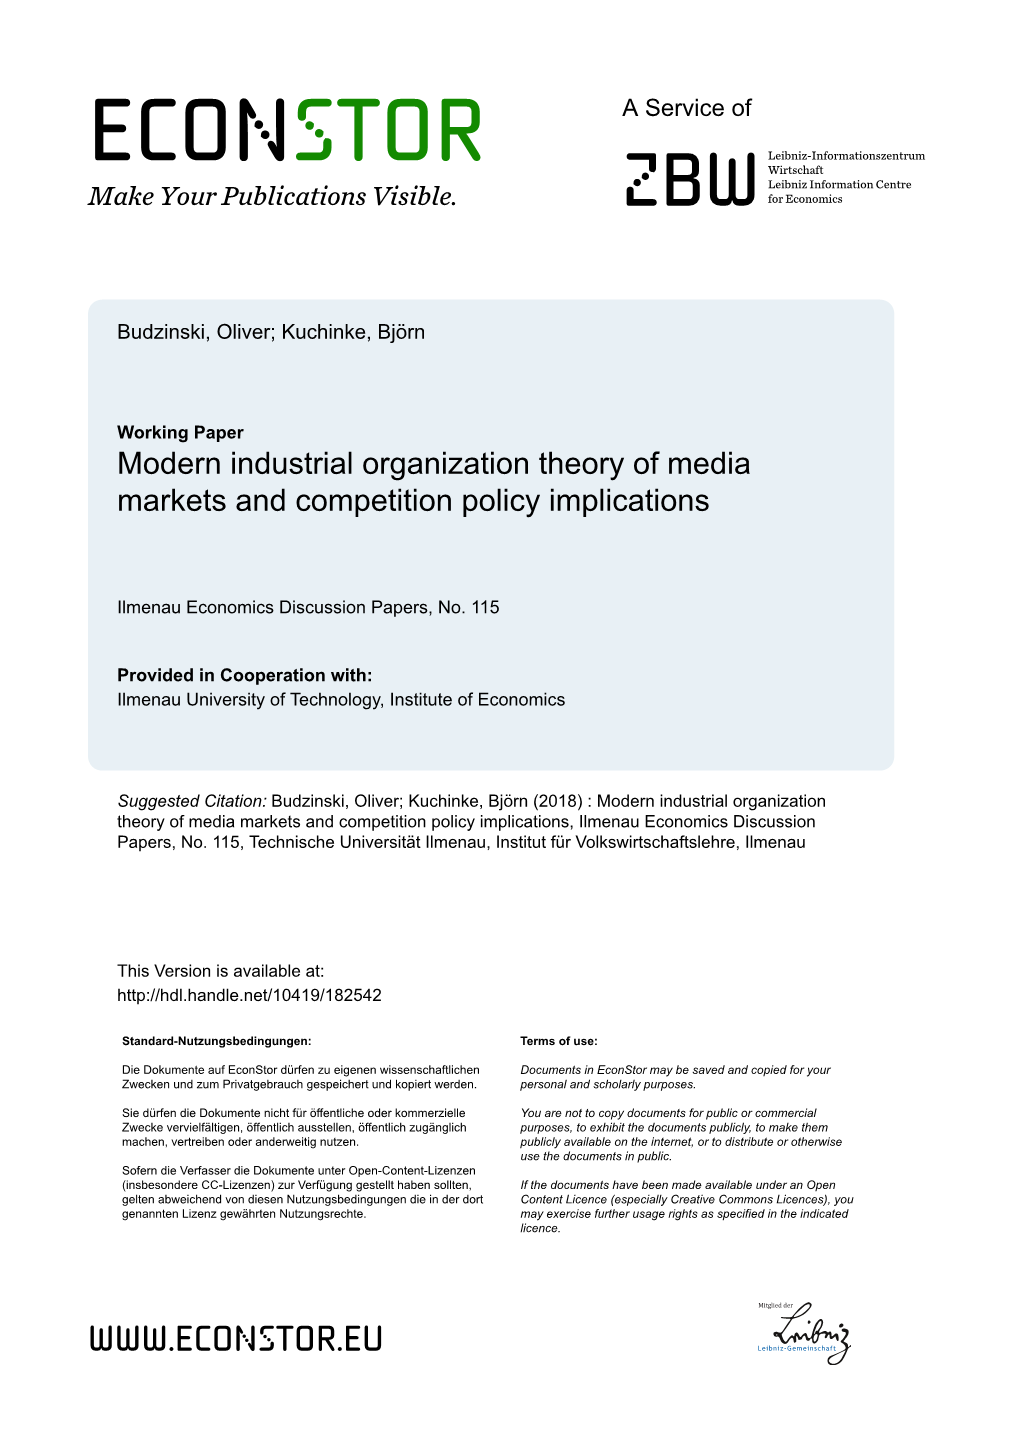 Modern Industrial Organization Theory of Media Markets and Competition Policy Implications